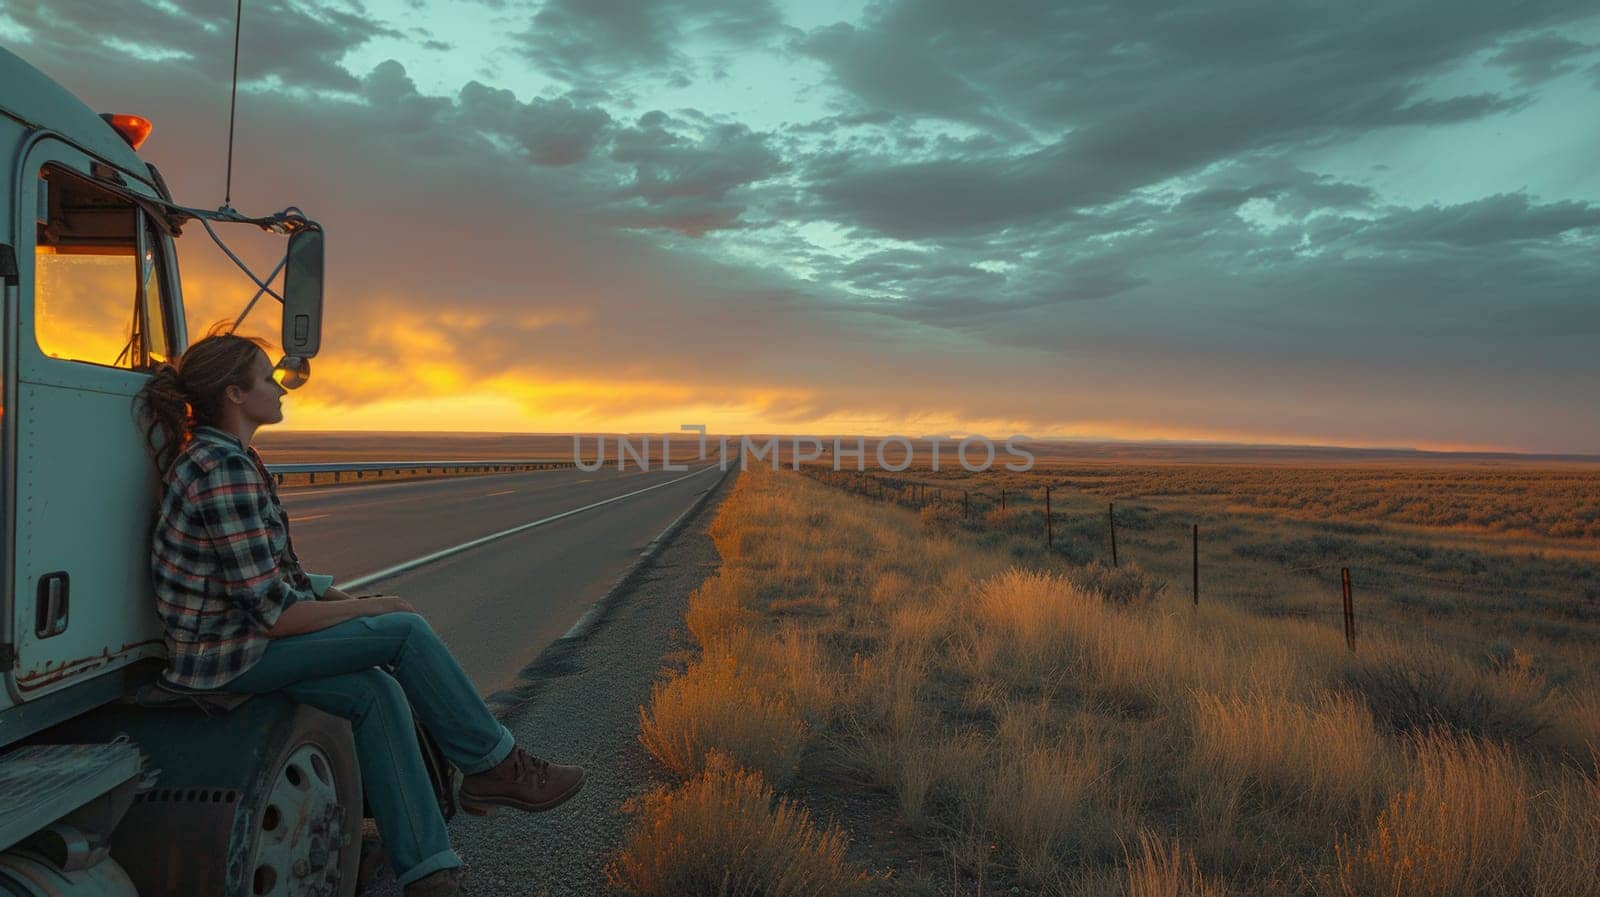 A woman sitting on the side of a truck looking out at sunset